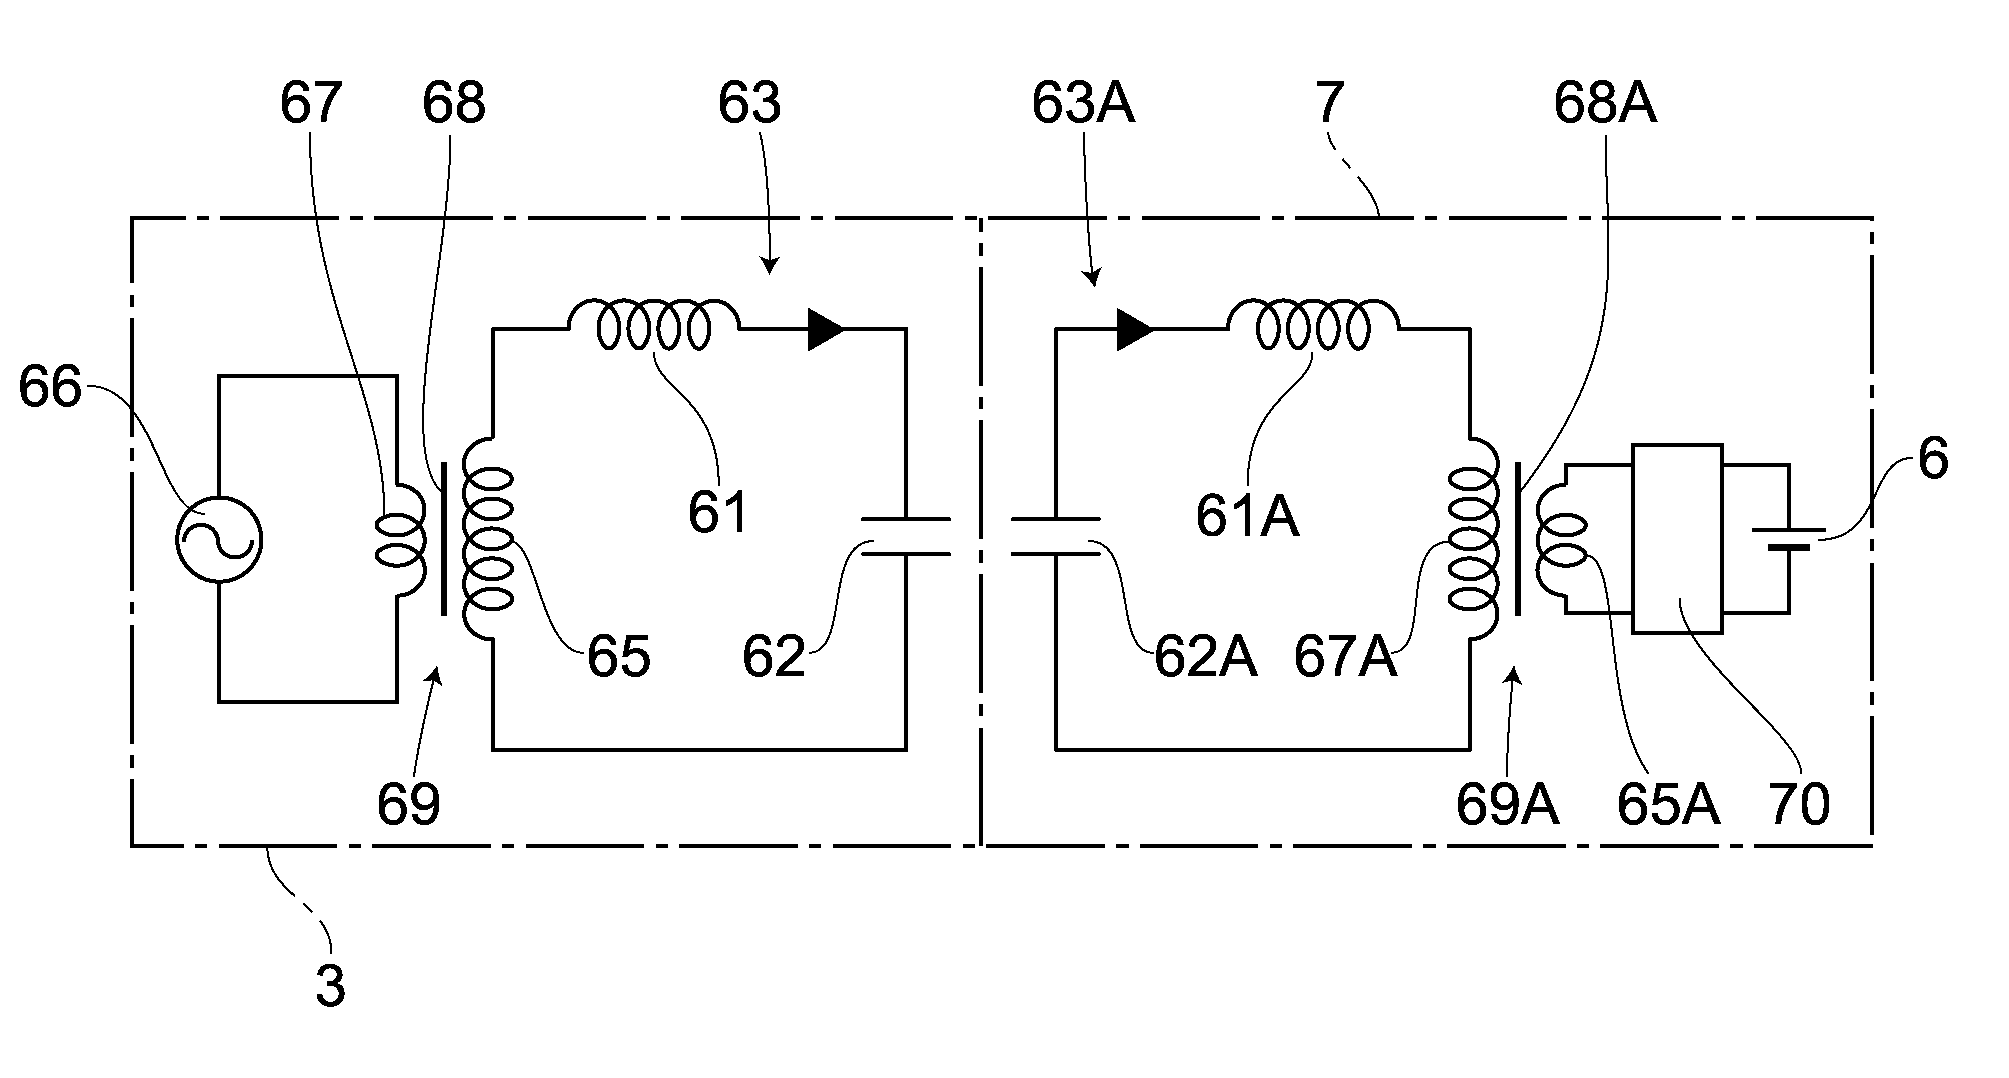 In-vehicle battery charging system